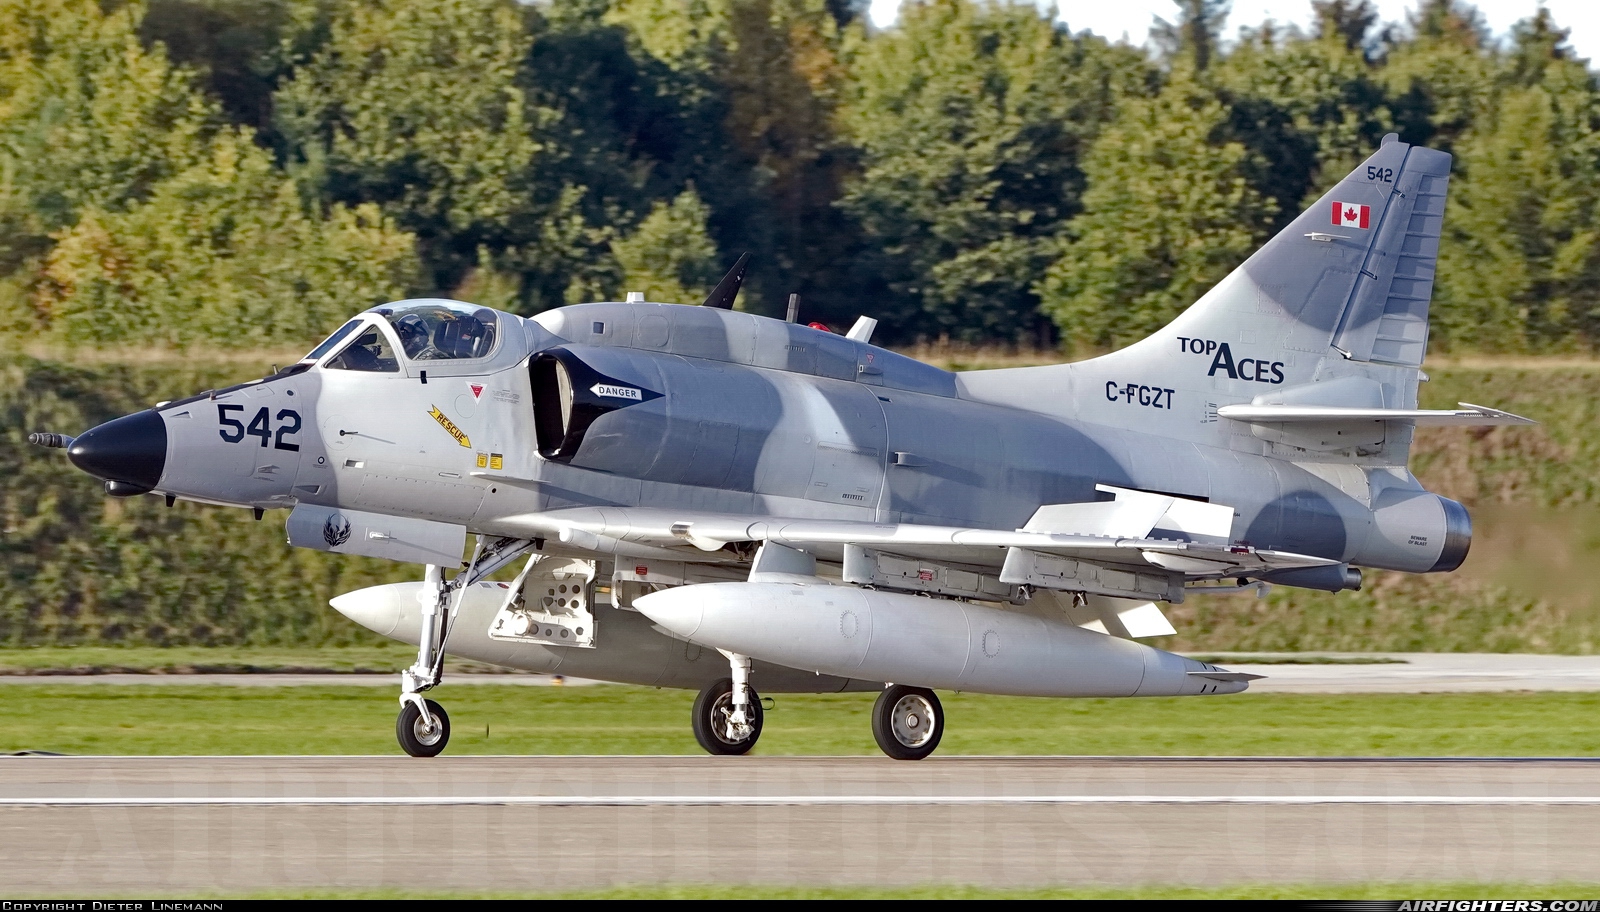 Company Owned - Top Aces (ATSI) Douglas A-4N Skyhawk C-FGZT at Wittmundhafen (Wittmund) (ETNT), Germany